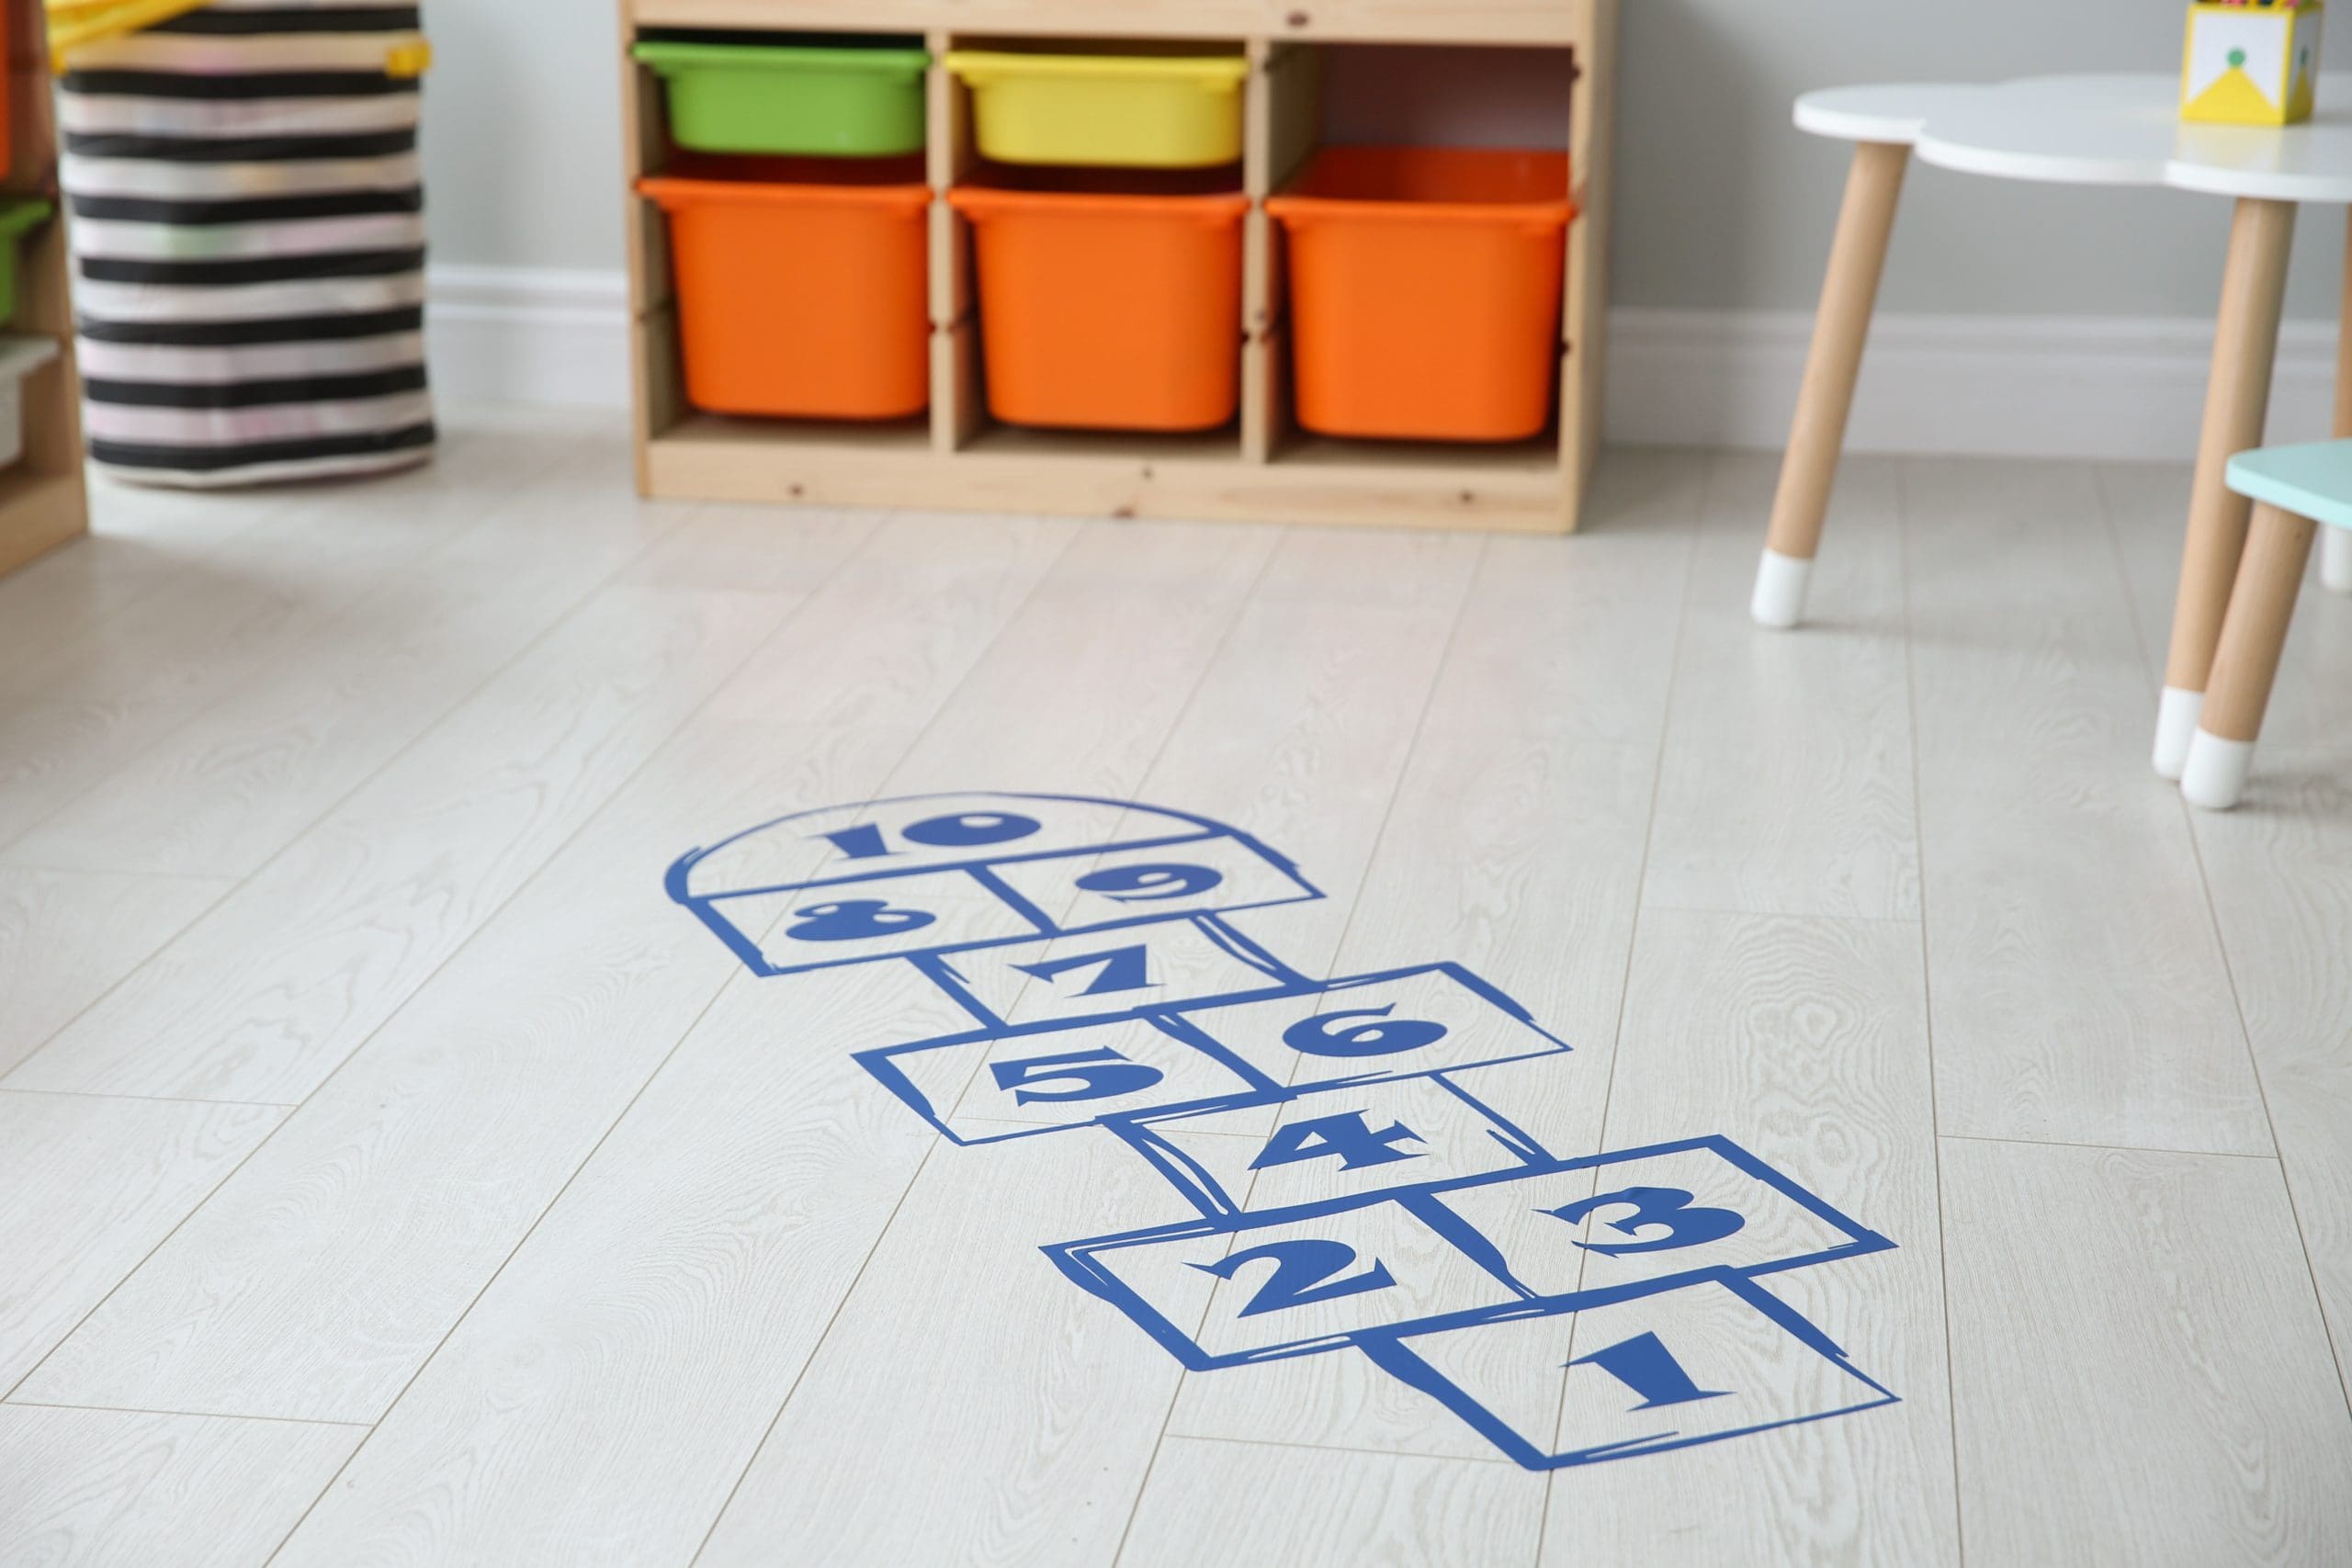 Fusion Marketing Top Ways to Get Creative With Floor Decals for Your Business or Home Hopscotch 1